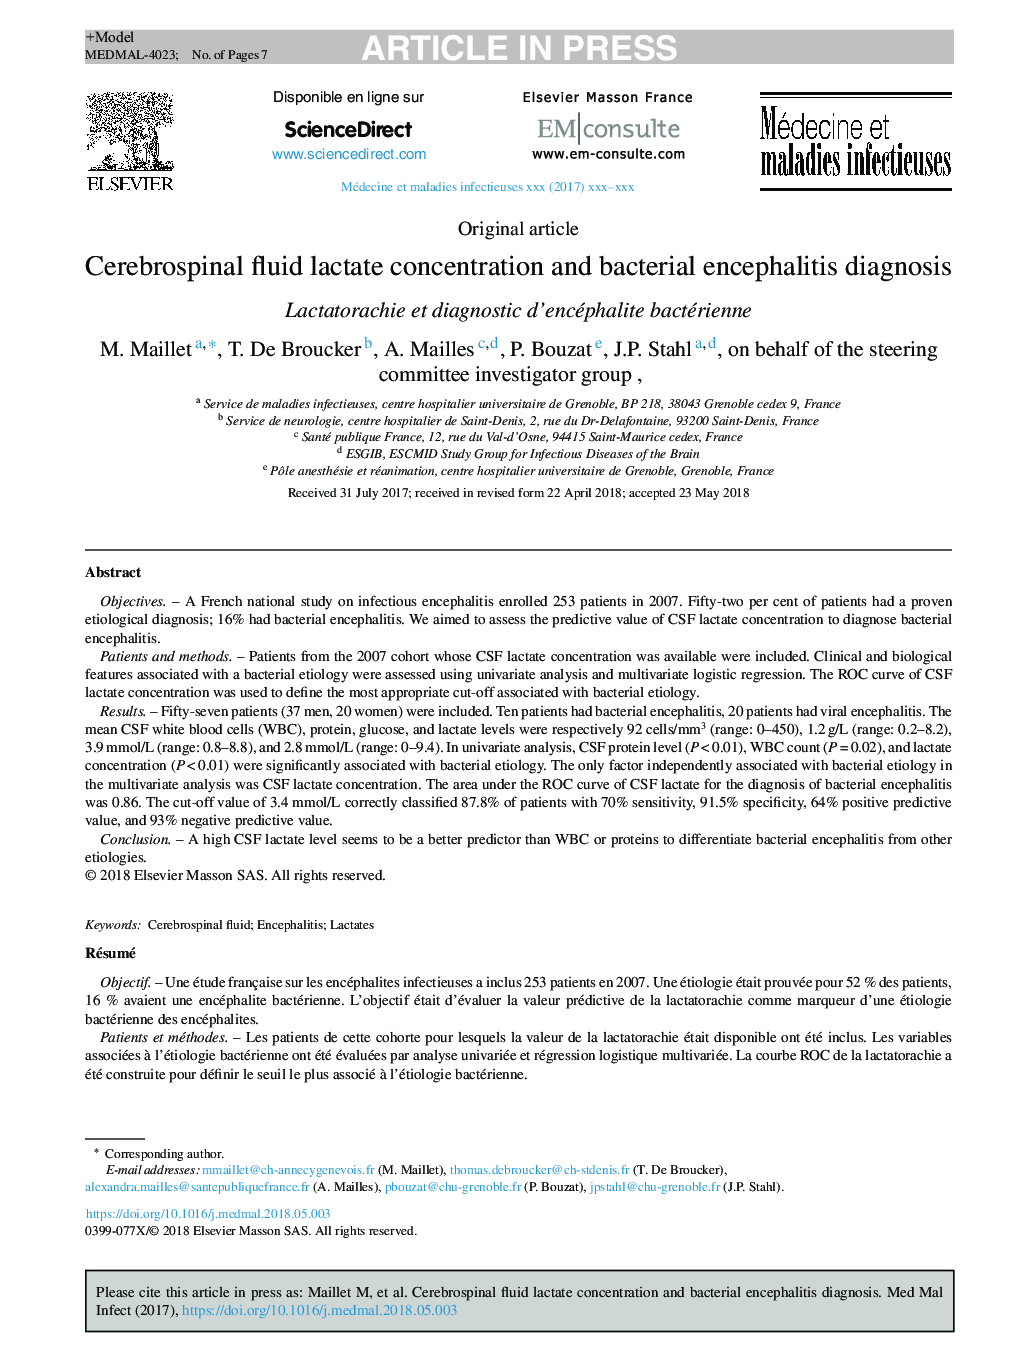 Cerebrospinal fluid lactate concentration and bacterial encephalitis diagnosis